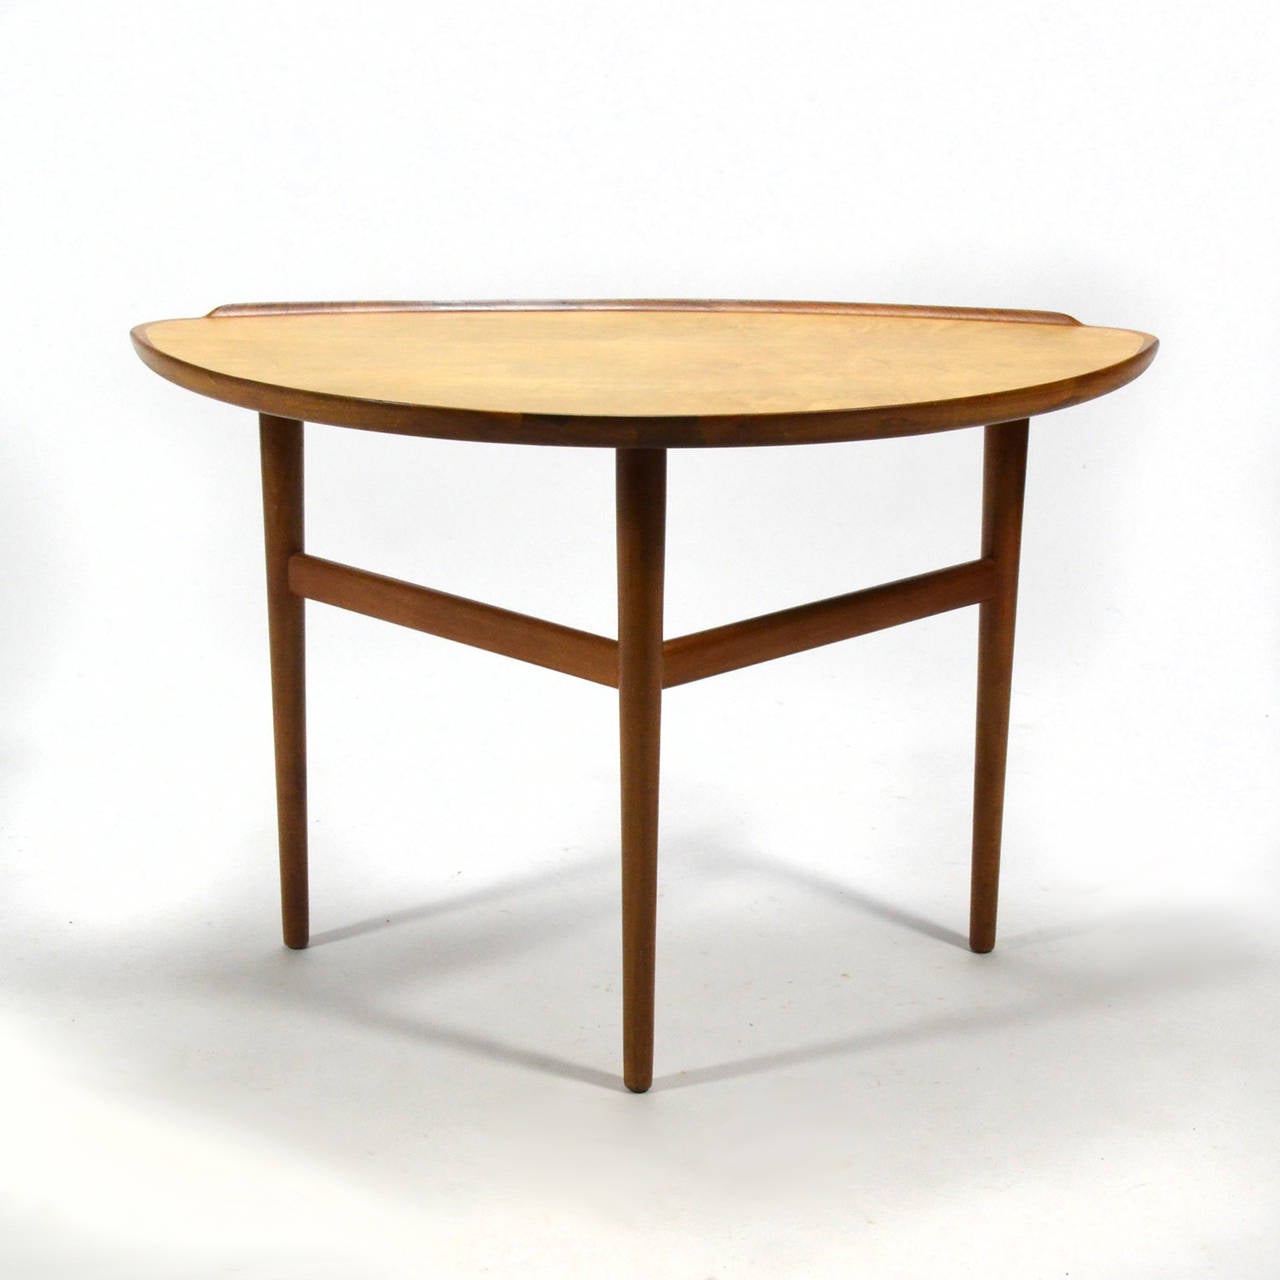 This beautiful table by Danish master Finn Juhl features solid walnut legs and raised lip that surrounds a delta-shaped top of sycamore. Designed during the peak of his creativity, this table is a perfect example of Juhl's aesthetic. Its scale